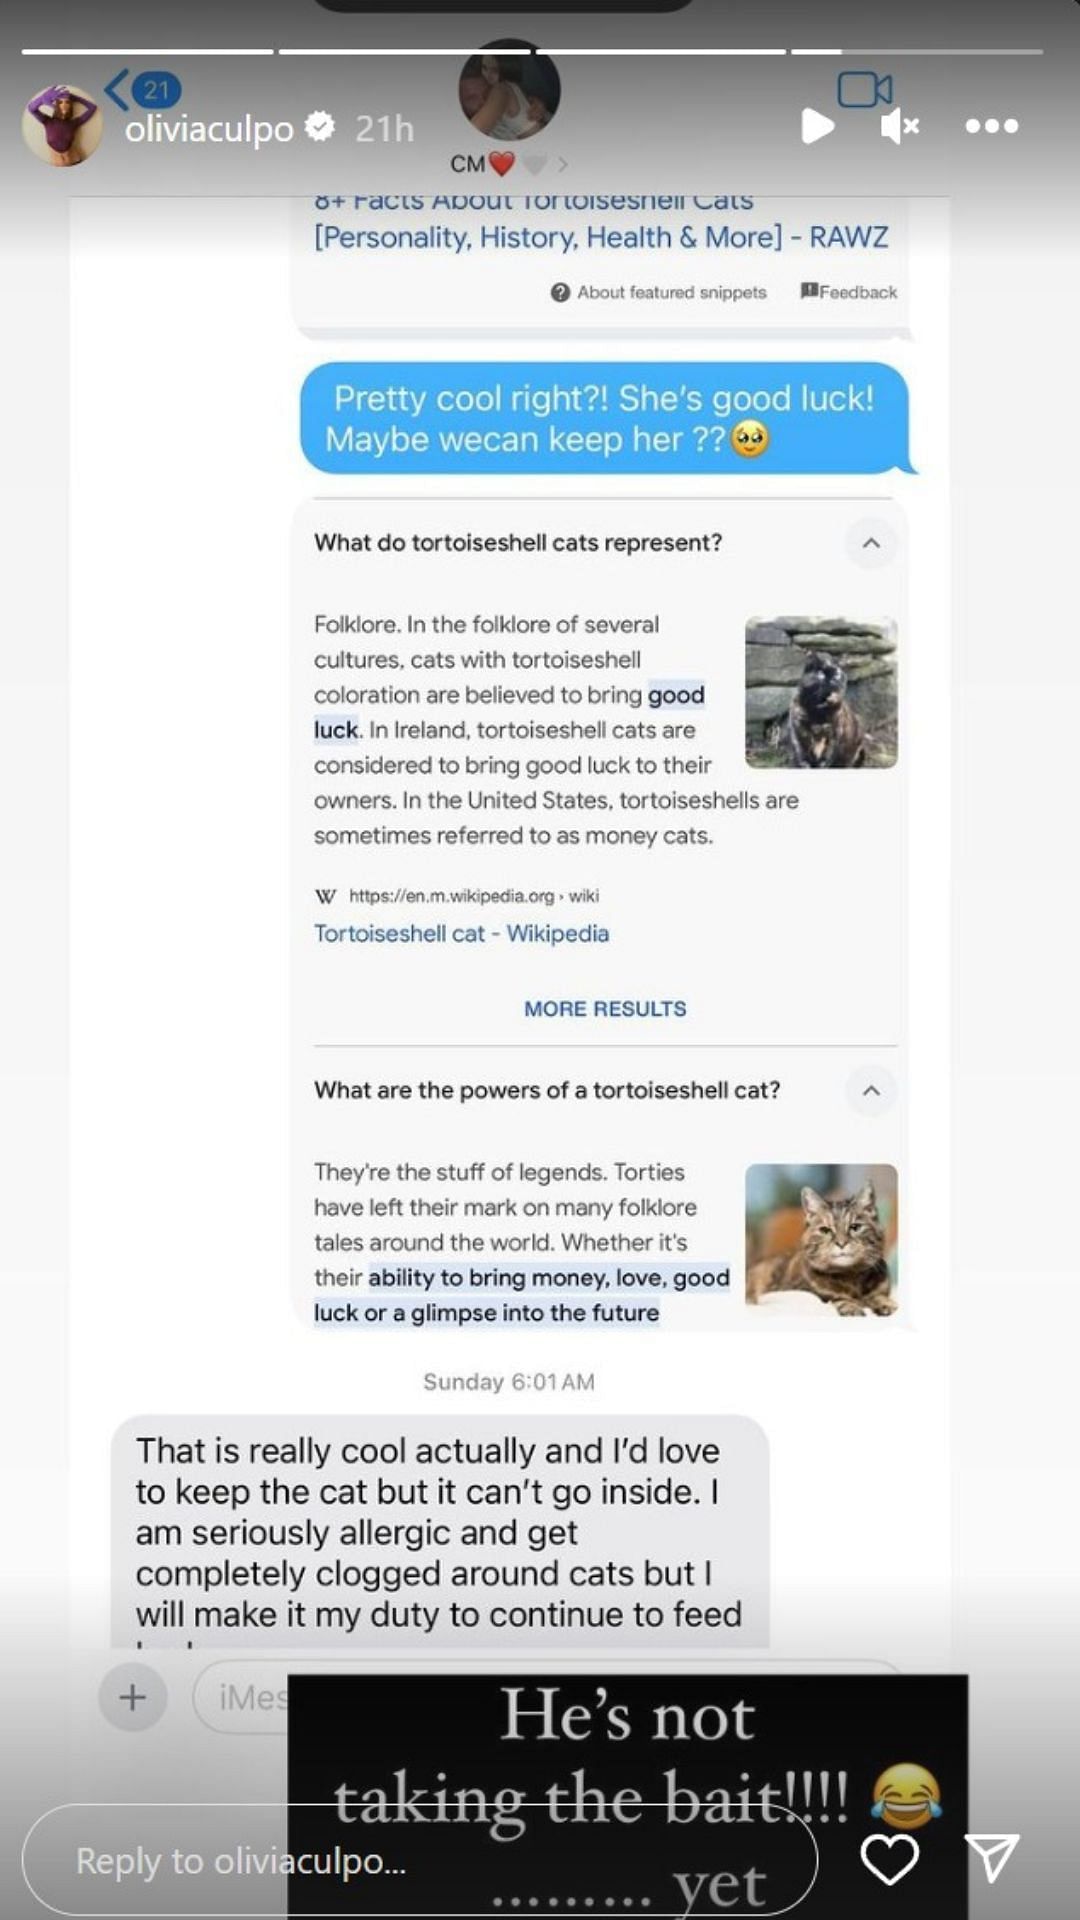 Christian McCaffrey responds to Culpo about the cat